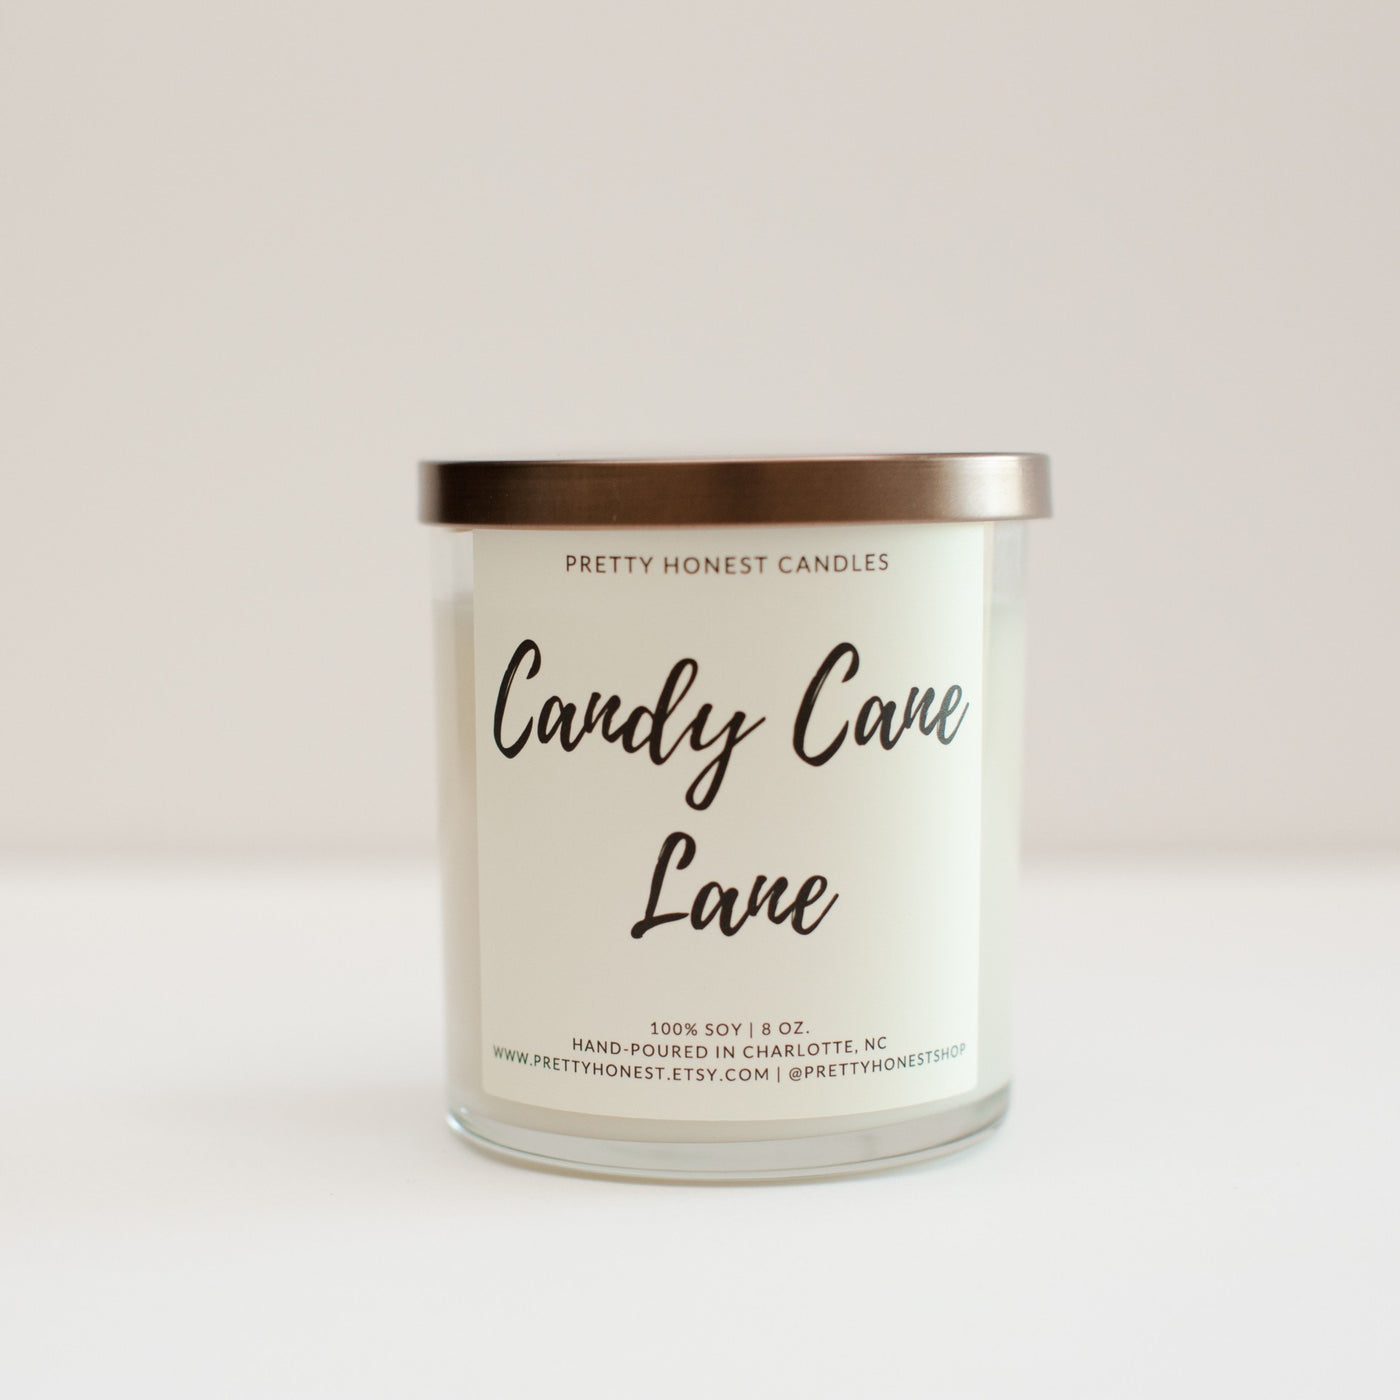 Candy Cane Lane Soy Candle - Pretty Honest Candles